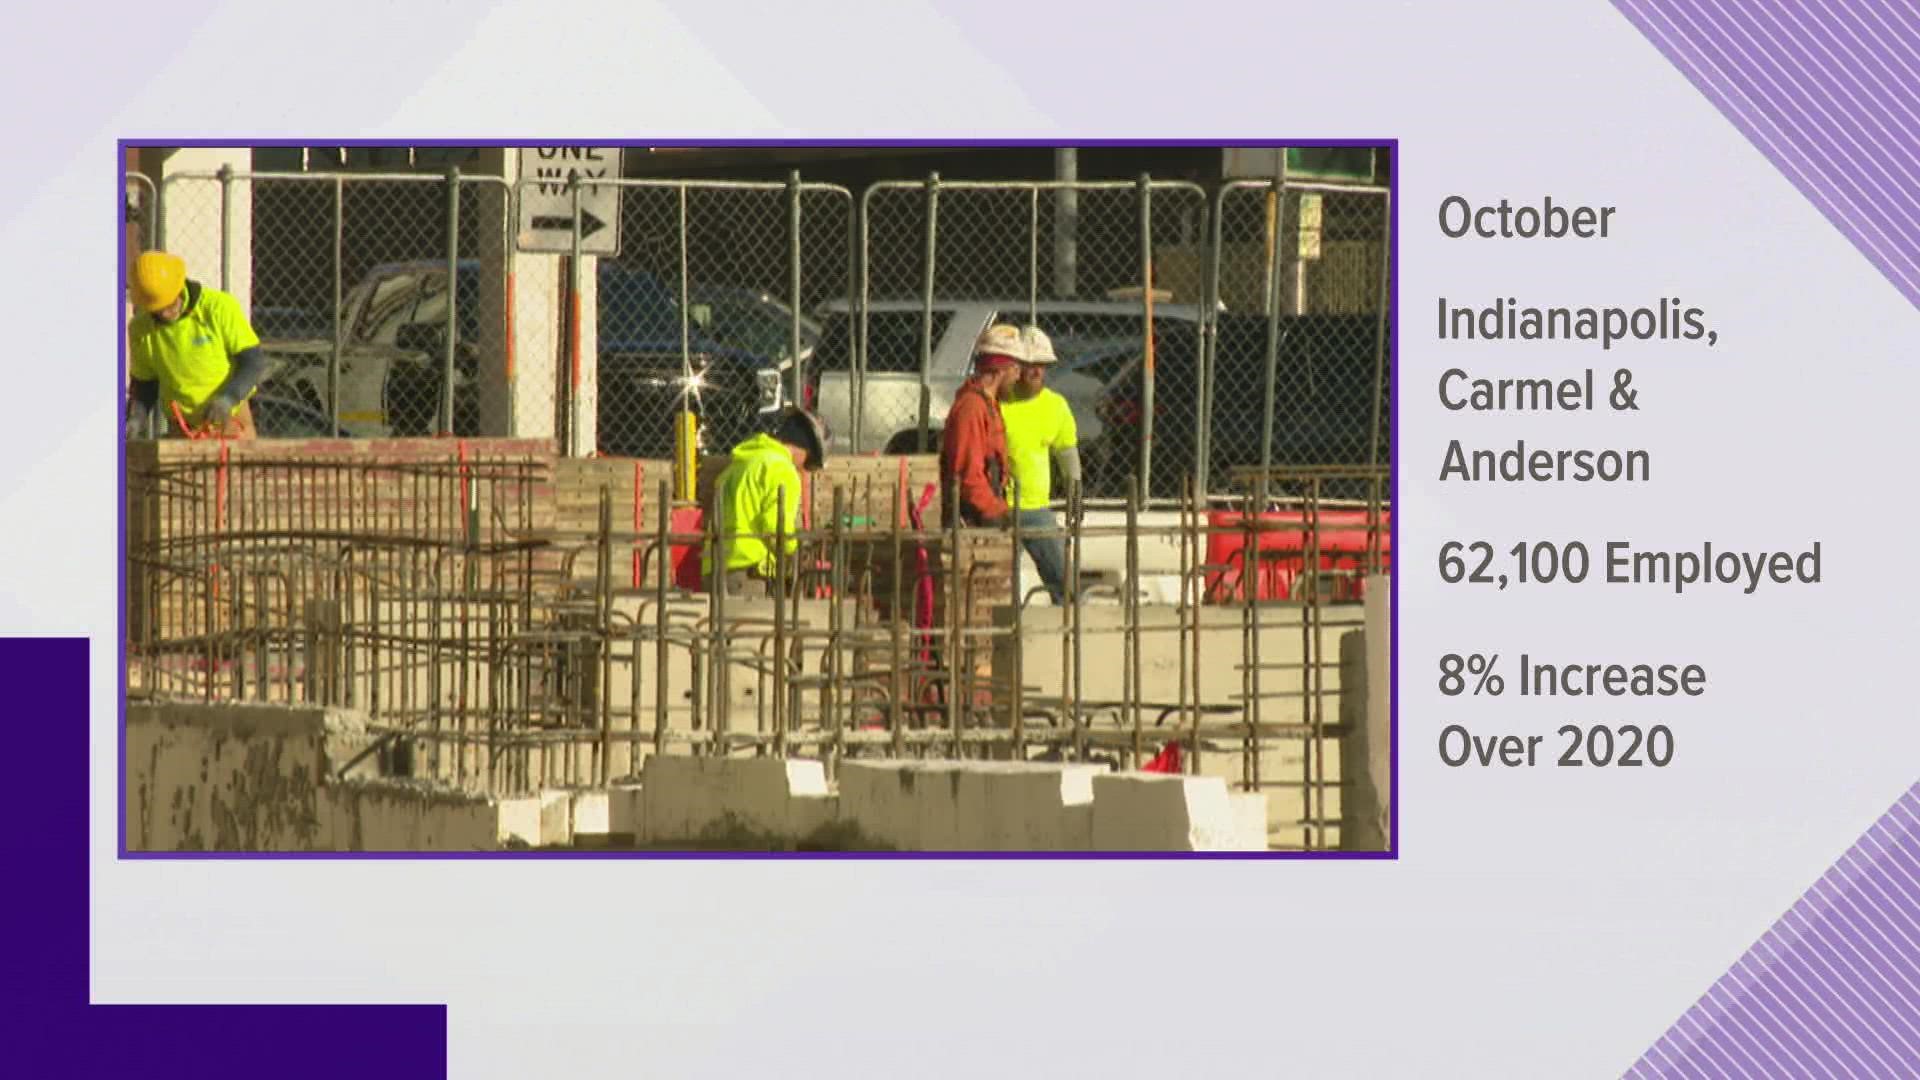 Just last month, 62,100 construction workers were employed across Indianapolis, Carmel and Anderson.